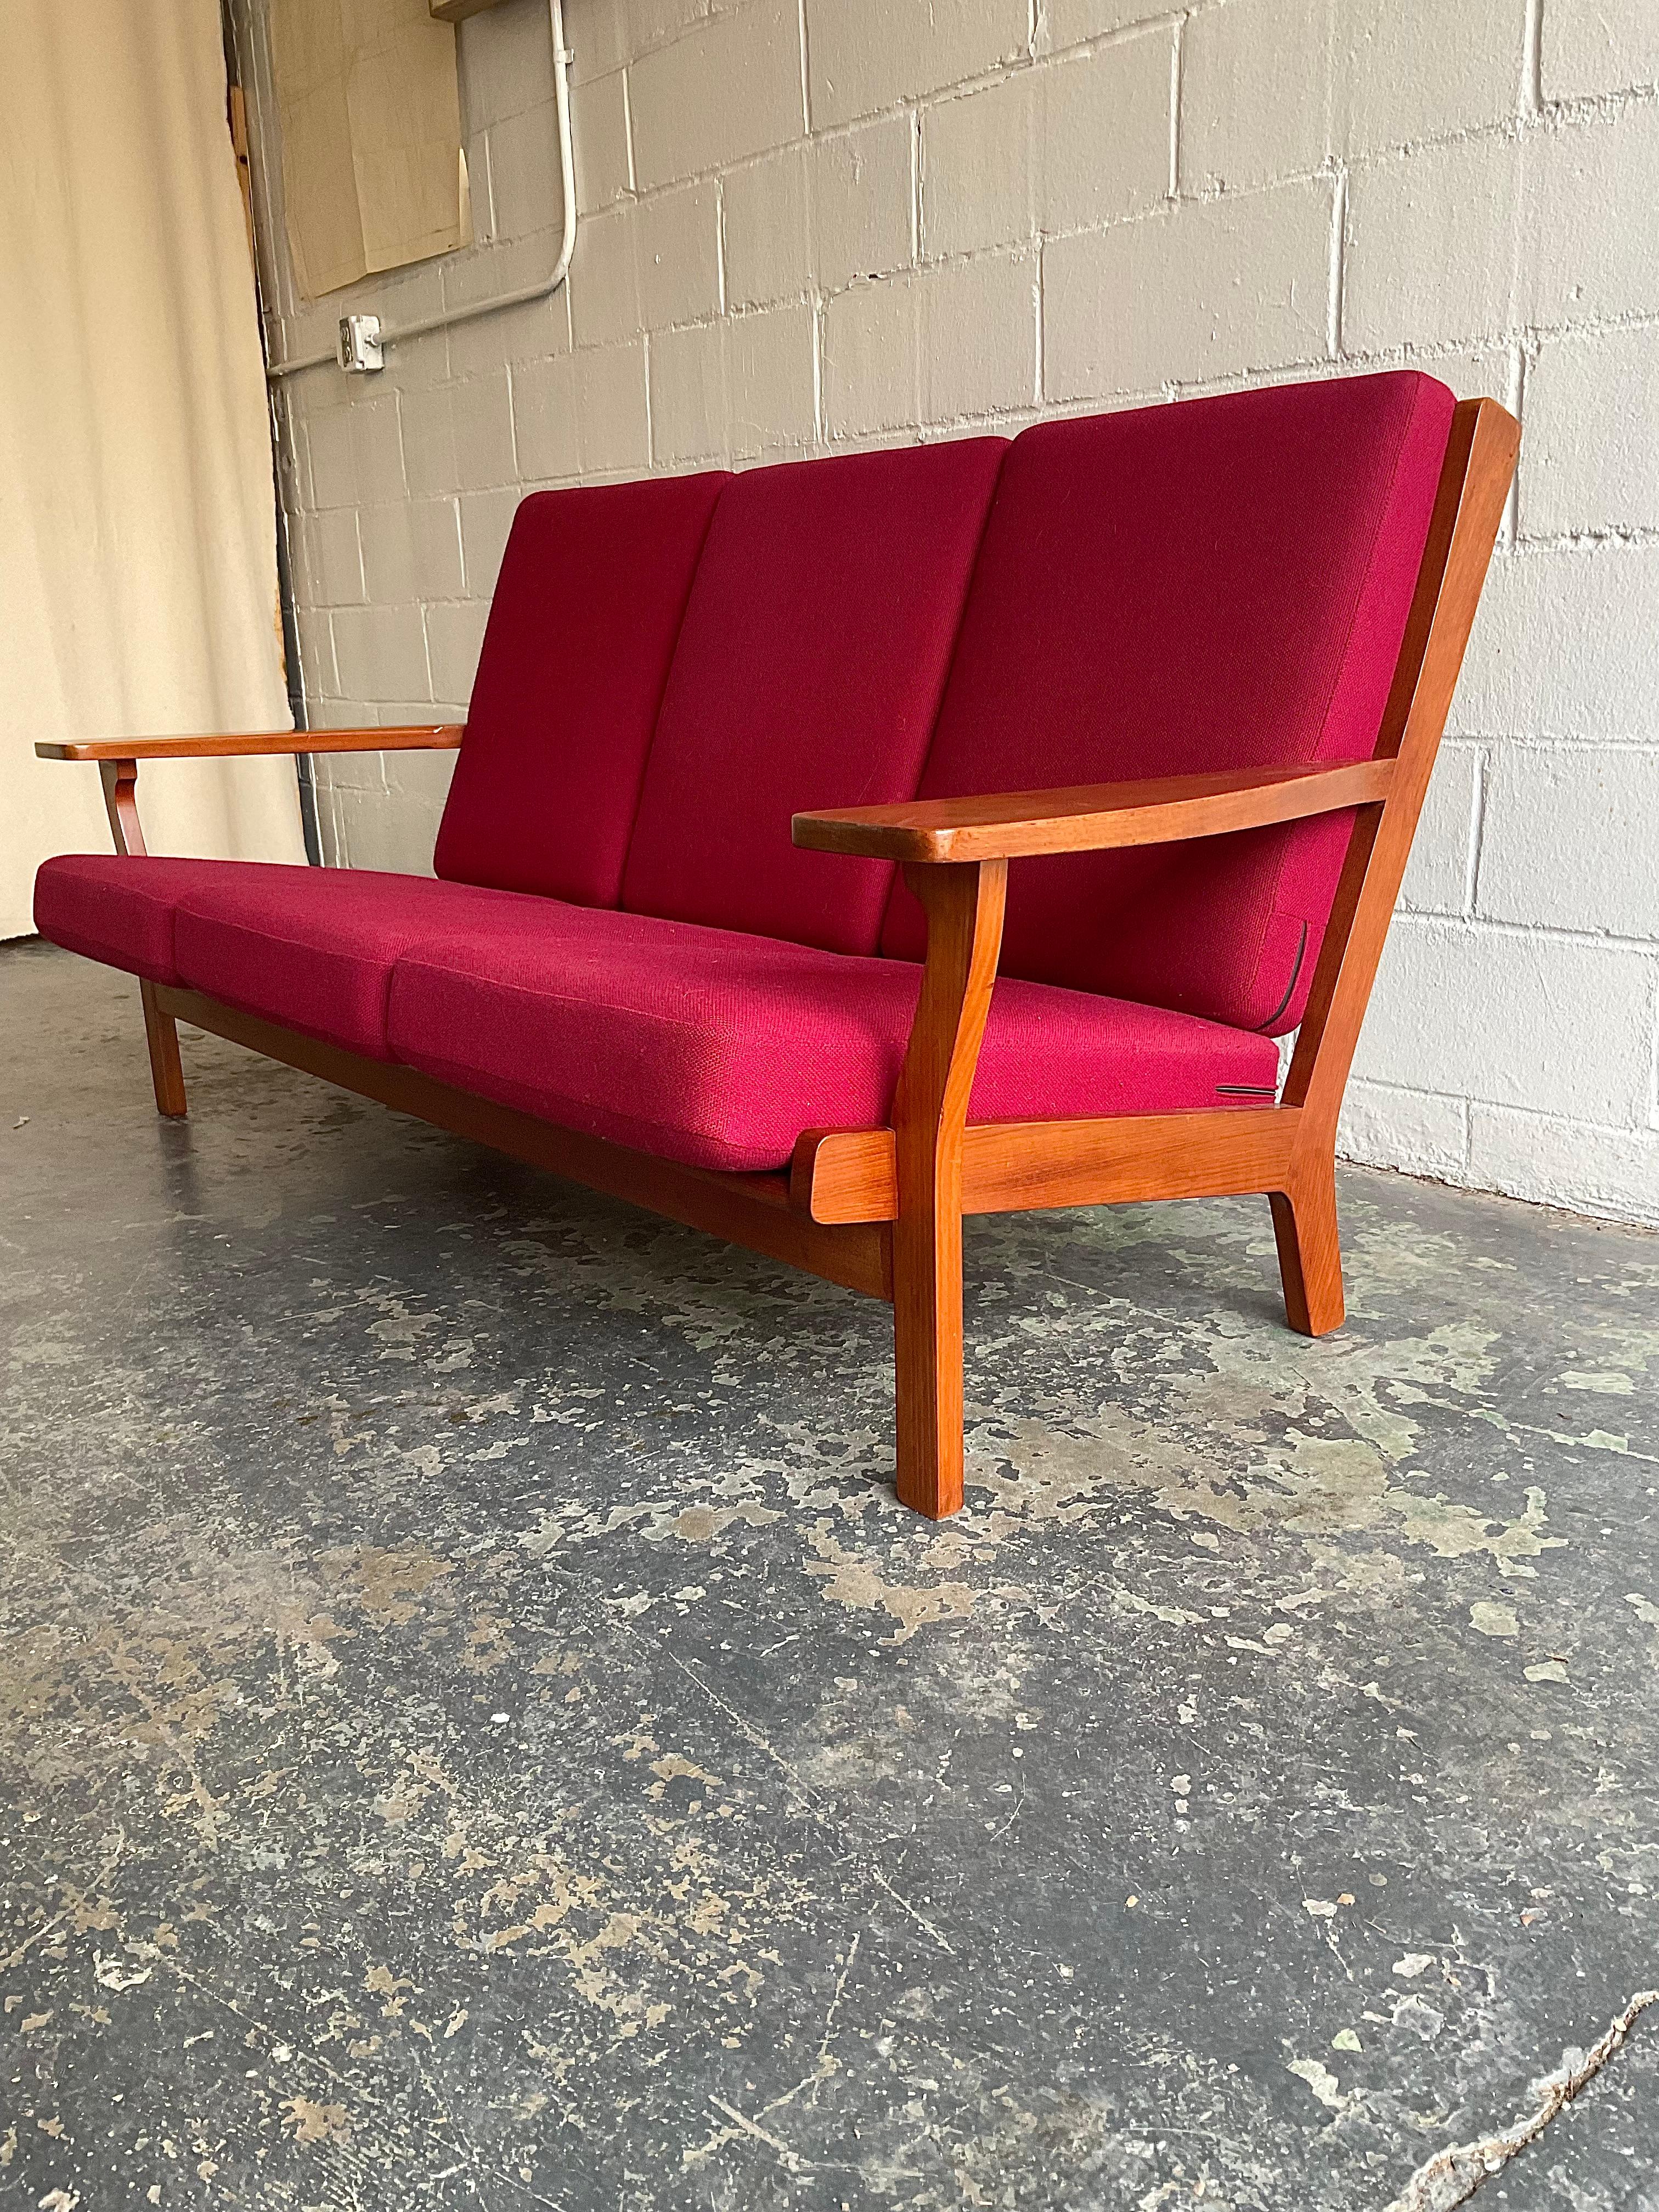 Elegant and commodious, here we have a rare example of Wegner’s celebrated GE-330/3A three seat sofa in carved teak frame and light burgundy boiled wool upholstery with original spring back and seat cushions. This example remains in very good